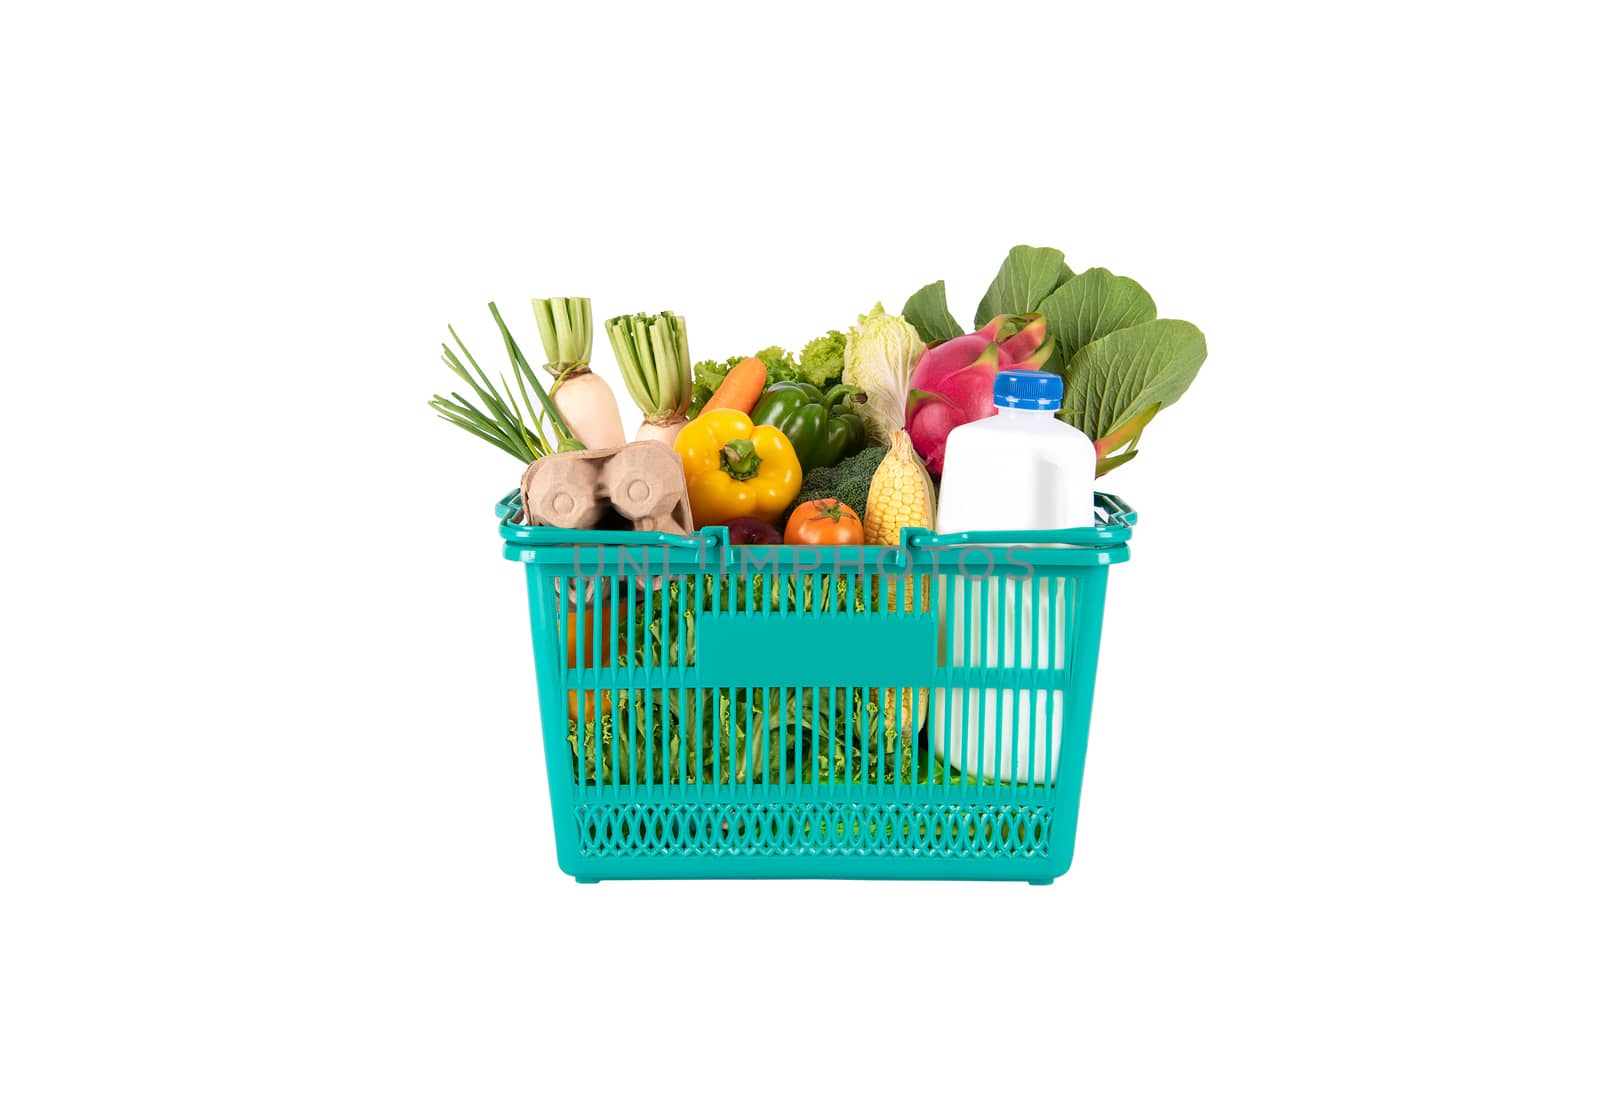 Green plastic grocery basket full of healthy vegetables and fruits,  ingredients isolated on white background. by barameeyay